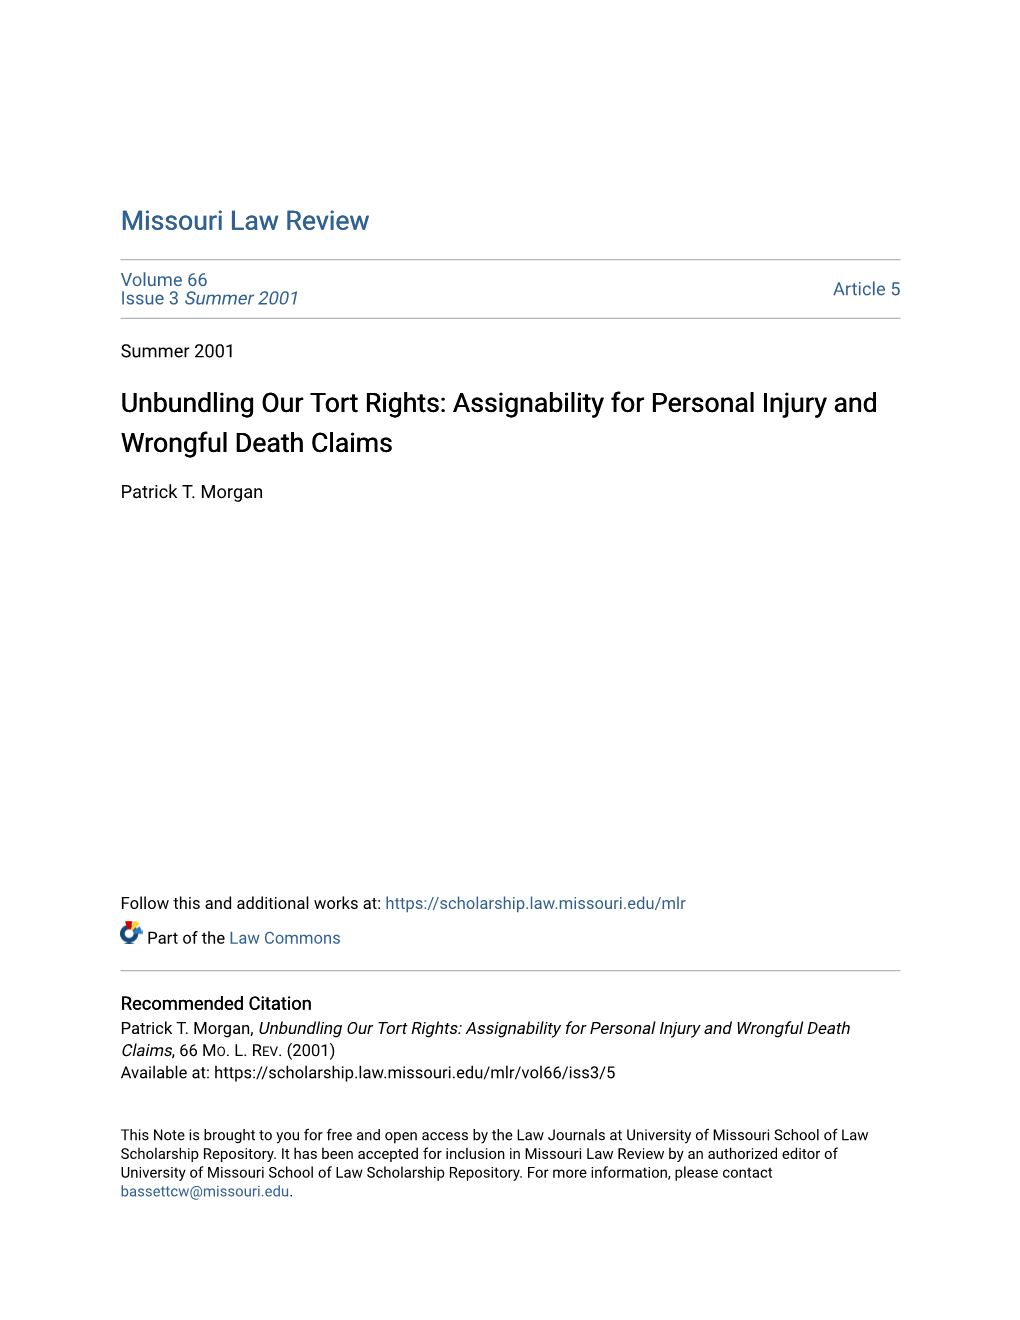 Assignability for Personal Injury and Wrongful Death Claims